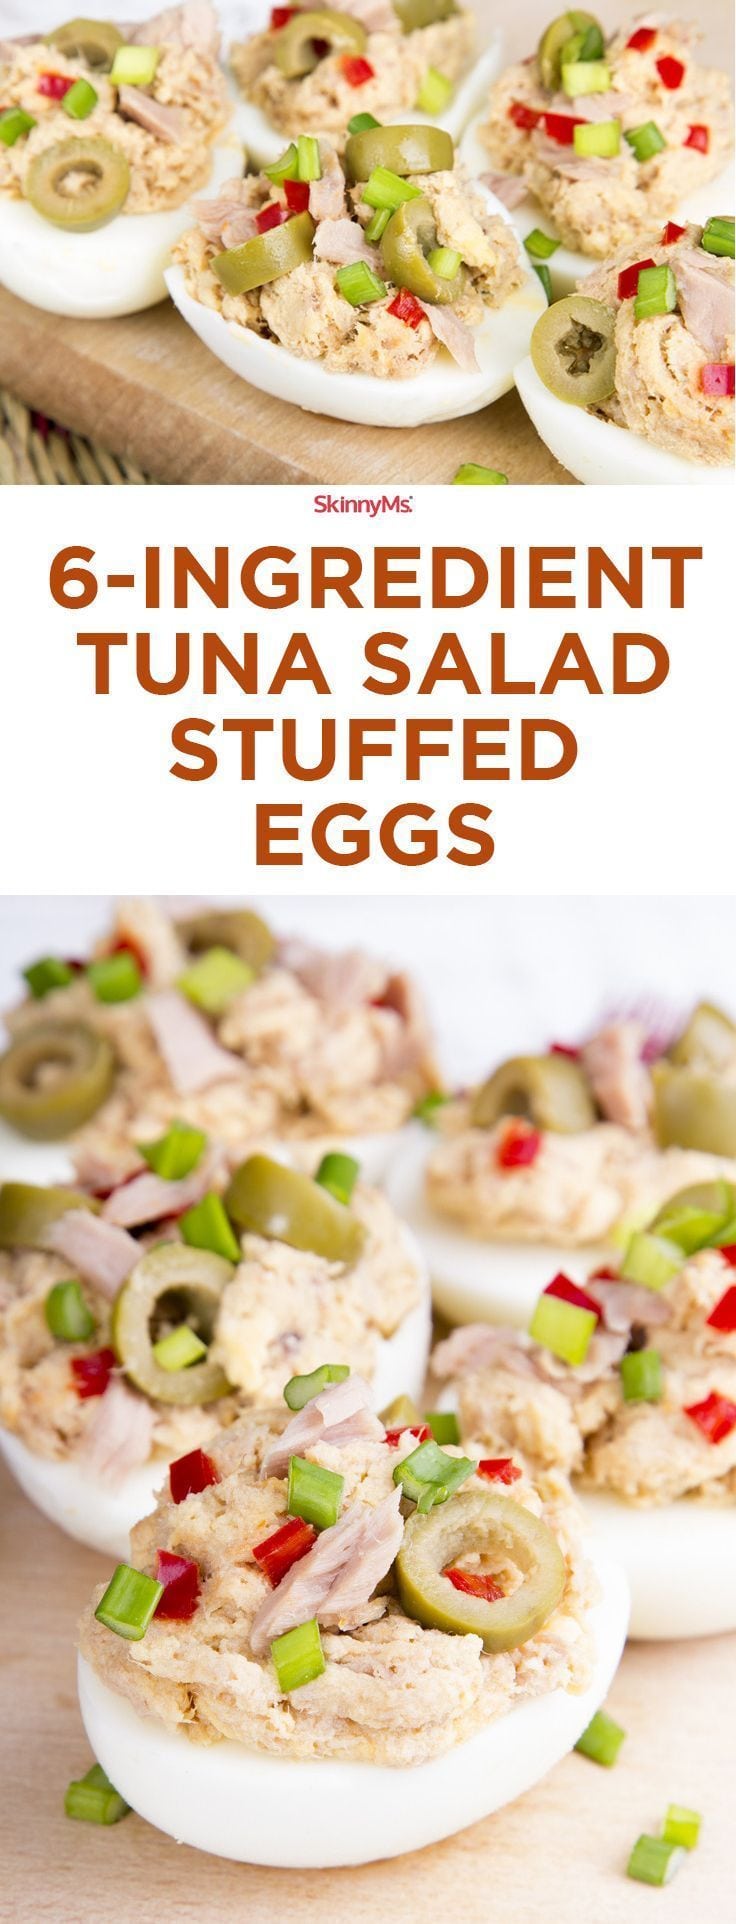 [ad_1]

6-Ingredient Tuna Salad Stuffed Eggs – you’ve never had tuna salad like this before! #skinnyms
Source by skinnyms
[ad_2]
			
			…